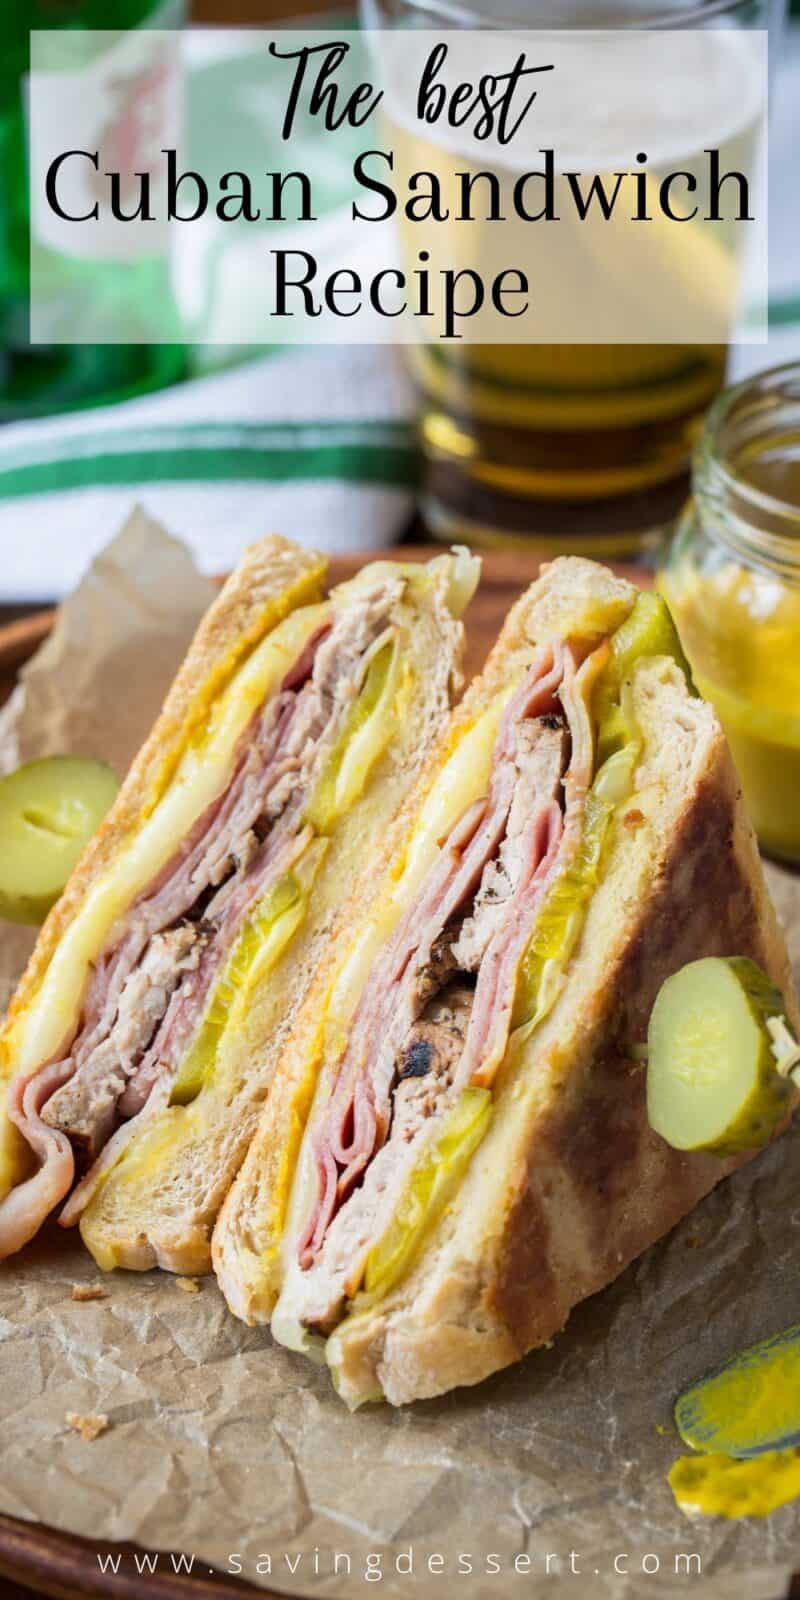 A grilled Cuban sandwich cut in half on a tray served with pickles